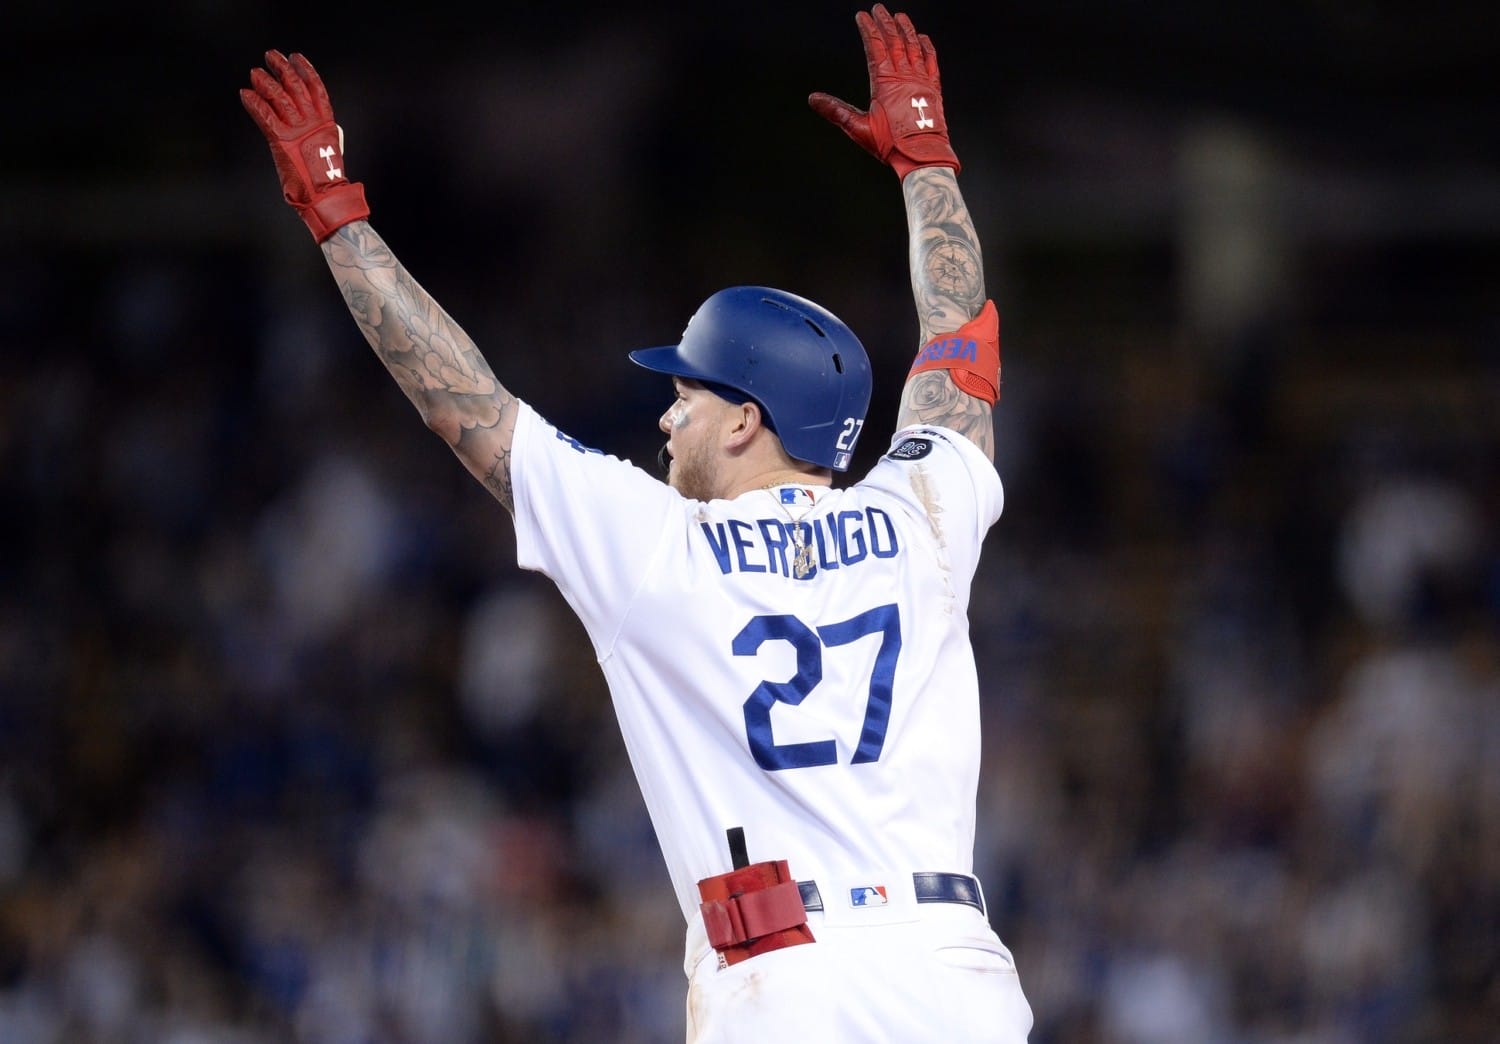 Alex Verdugo Says Good Bye, Thanks Dodgers Organization, Teammates & Fans  After Trade To Red Sox